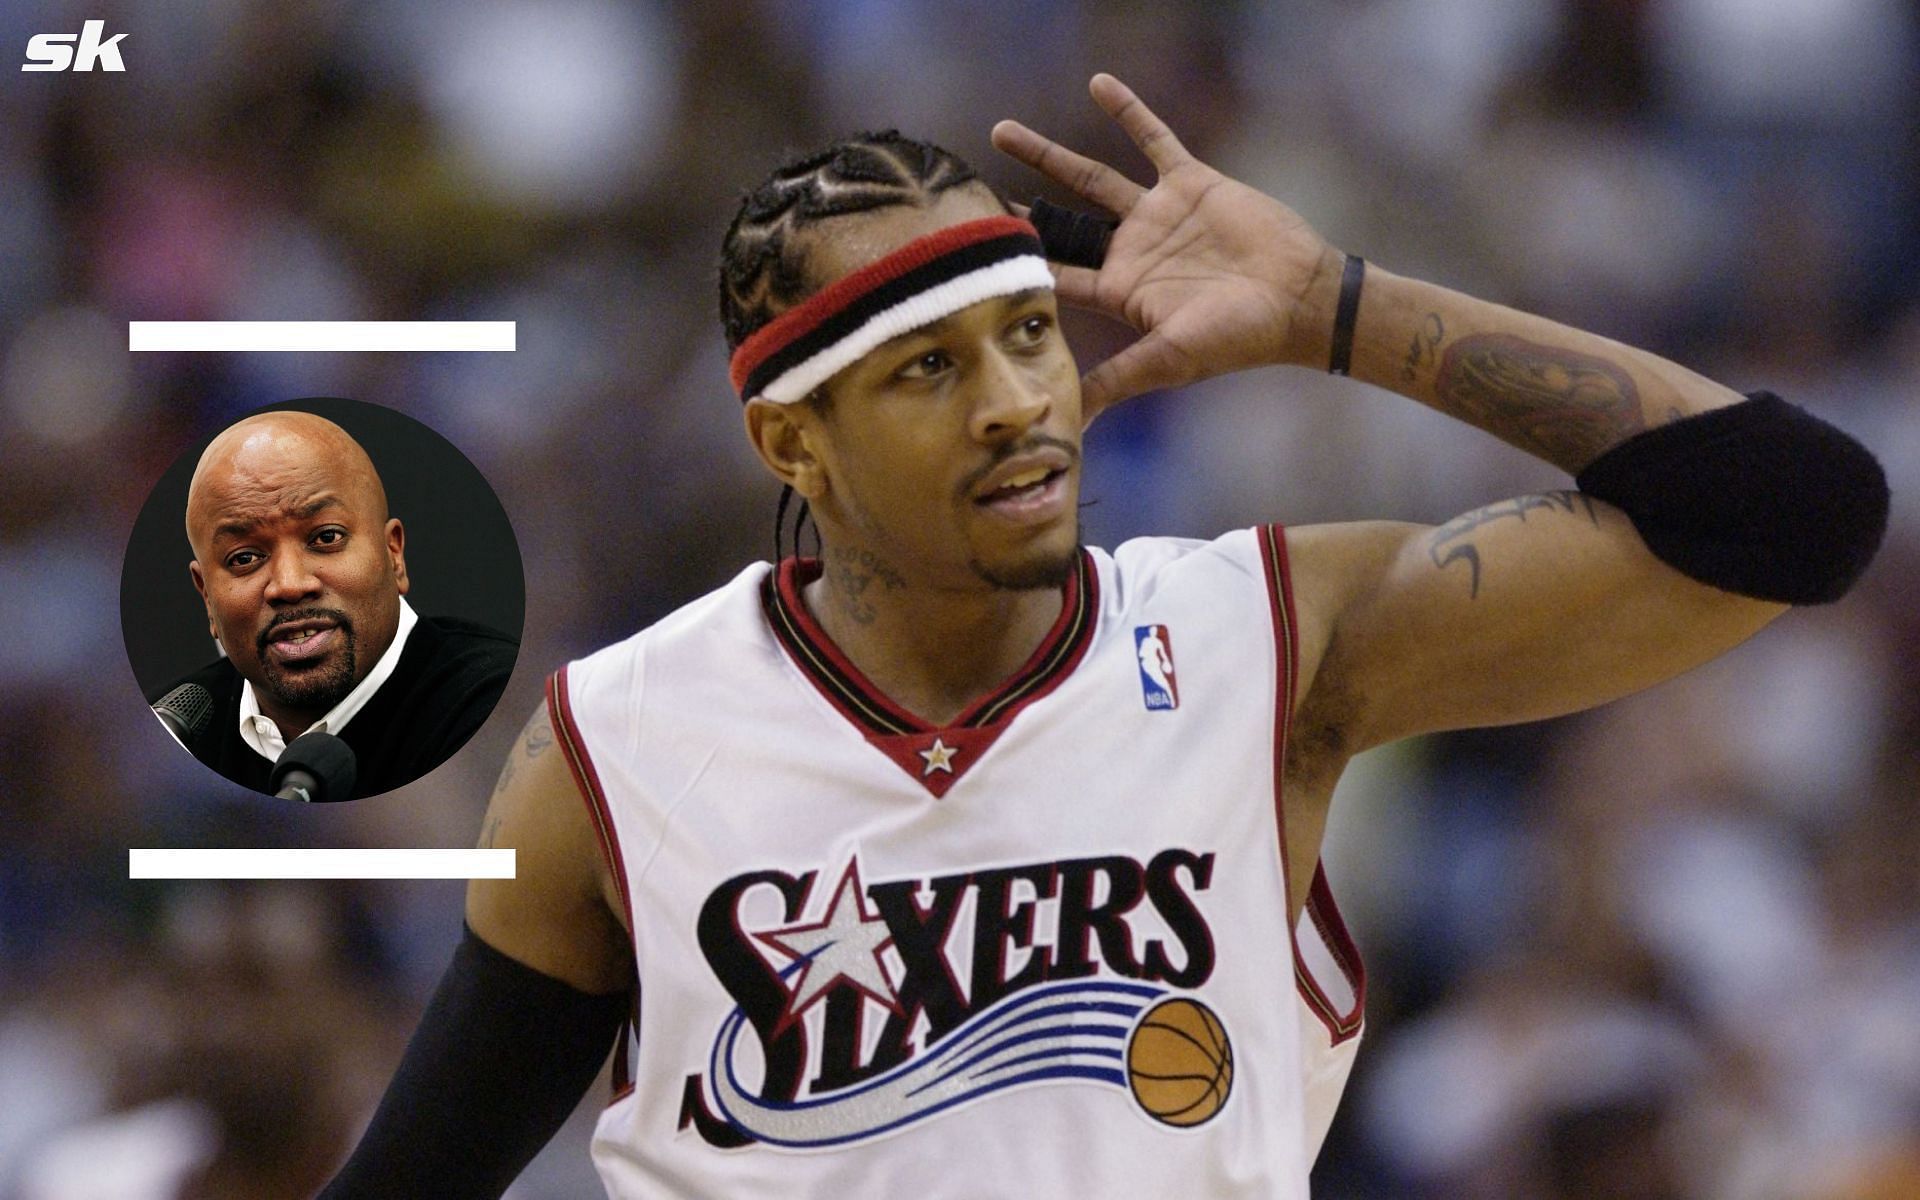 The Philadelphia 76ers had to hide Allen Iverson&#039;s jersey to keep him from playing when injured.